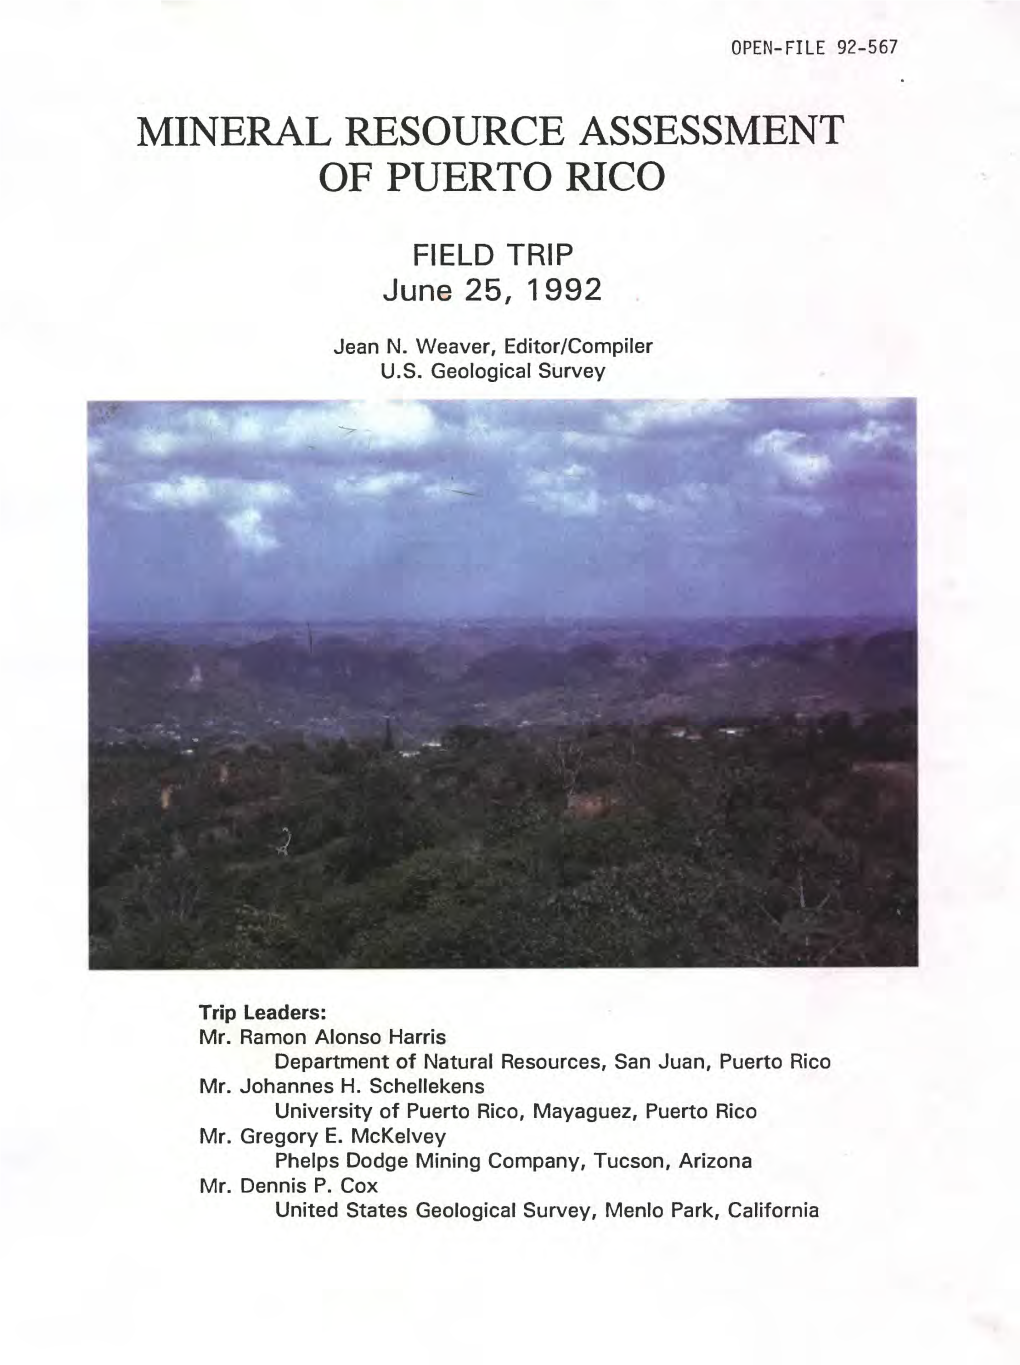 Mineral Resource Assessment of Puerto Rico